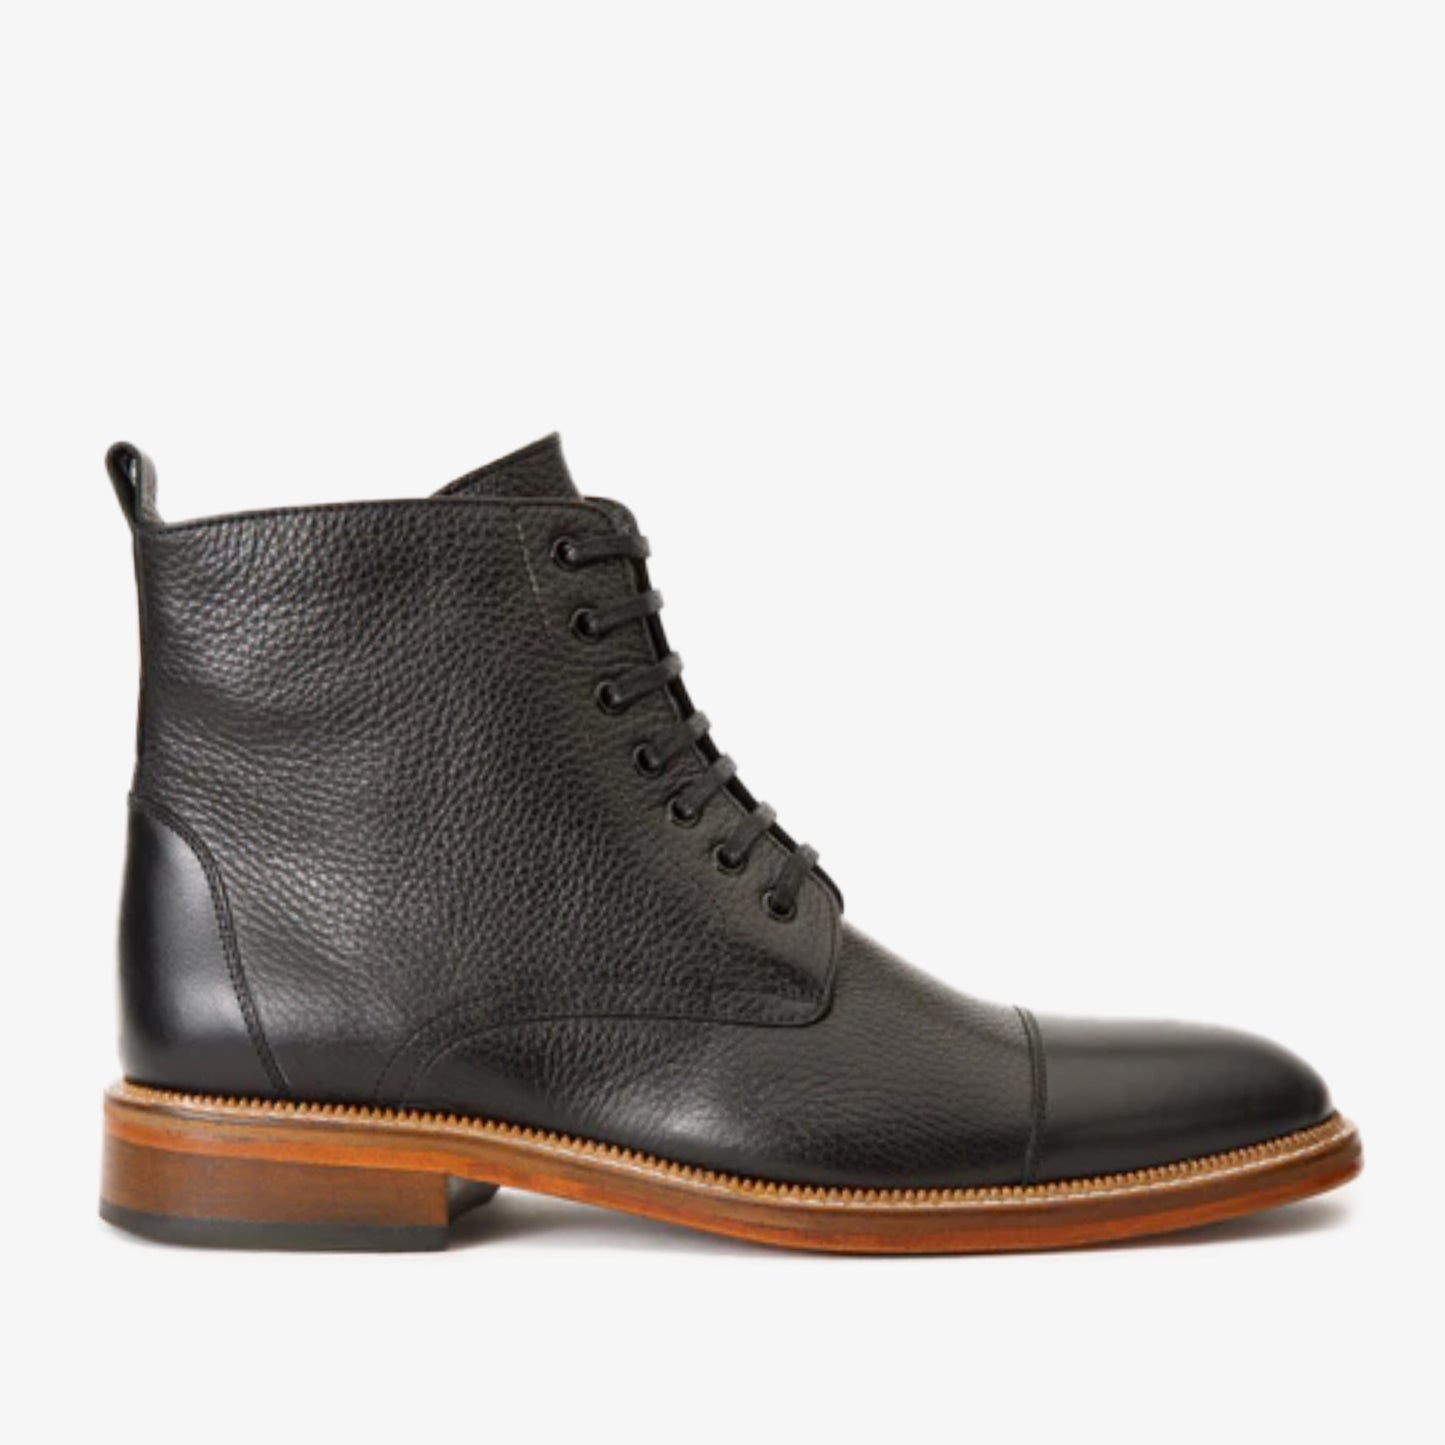 The Bothey Black Leather Cap-Toe Lace-up Men Boot with a Zipper